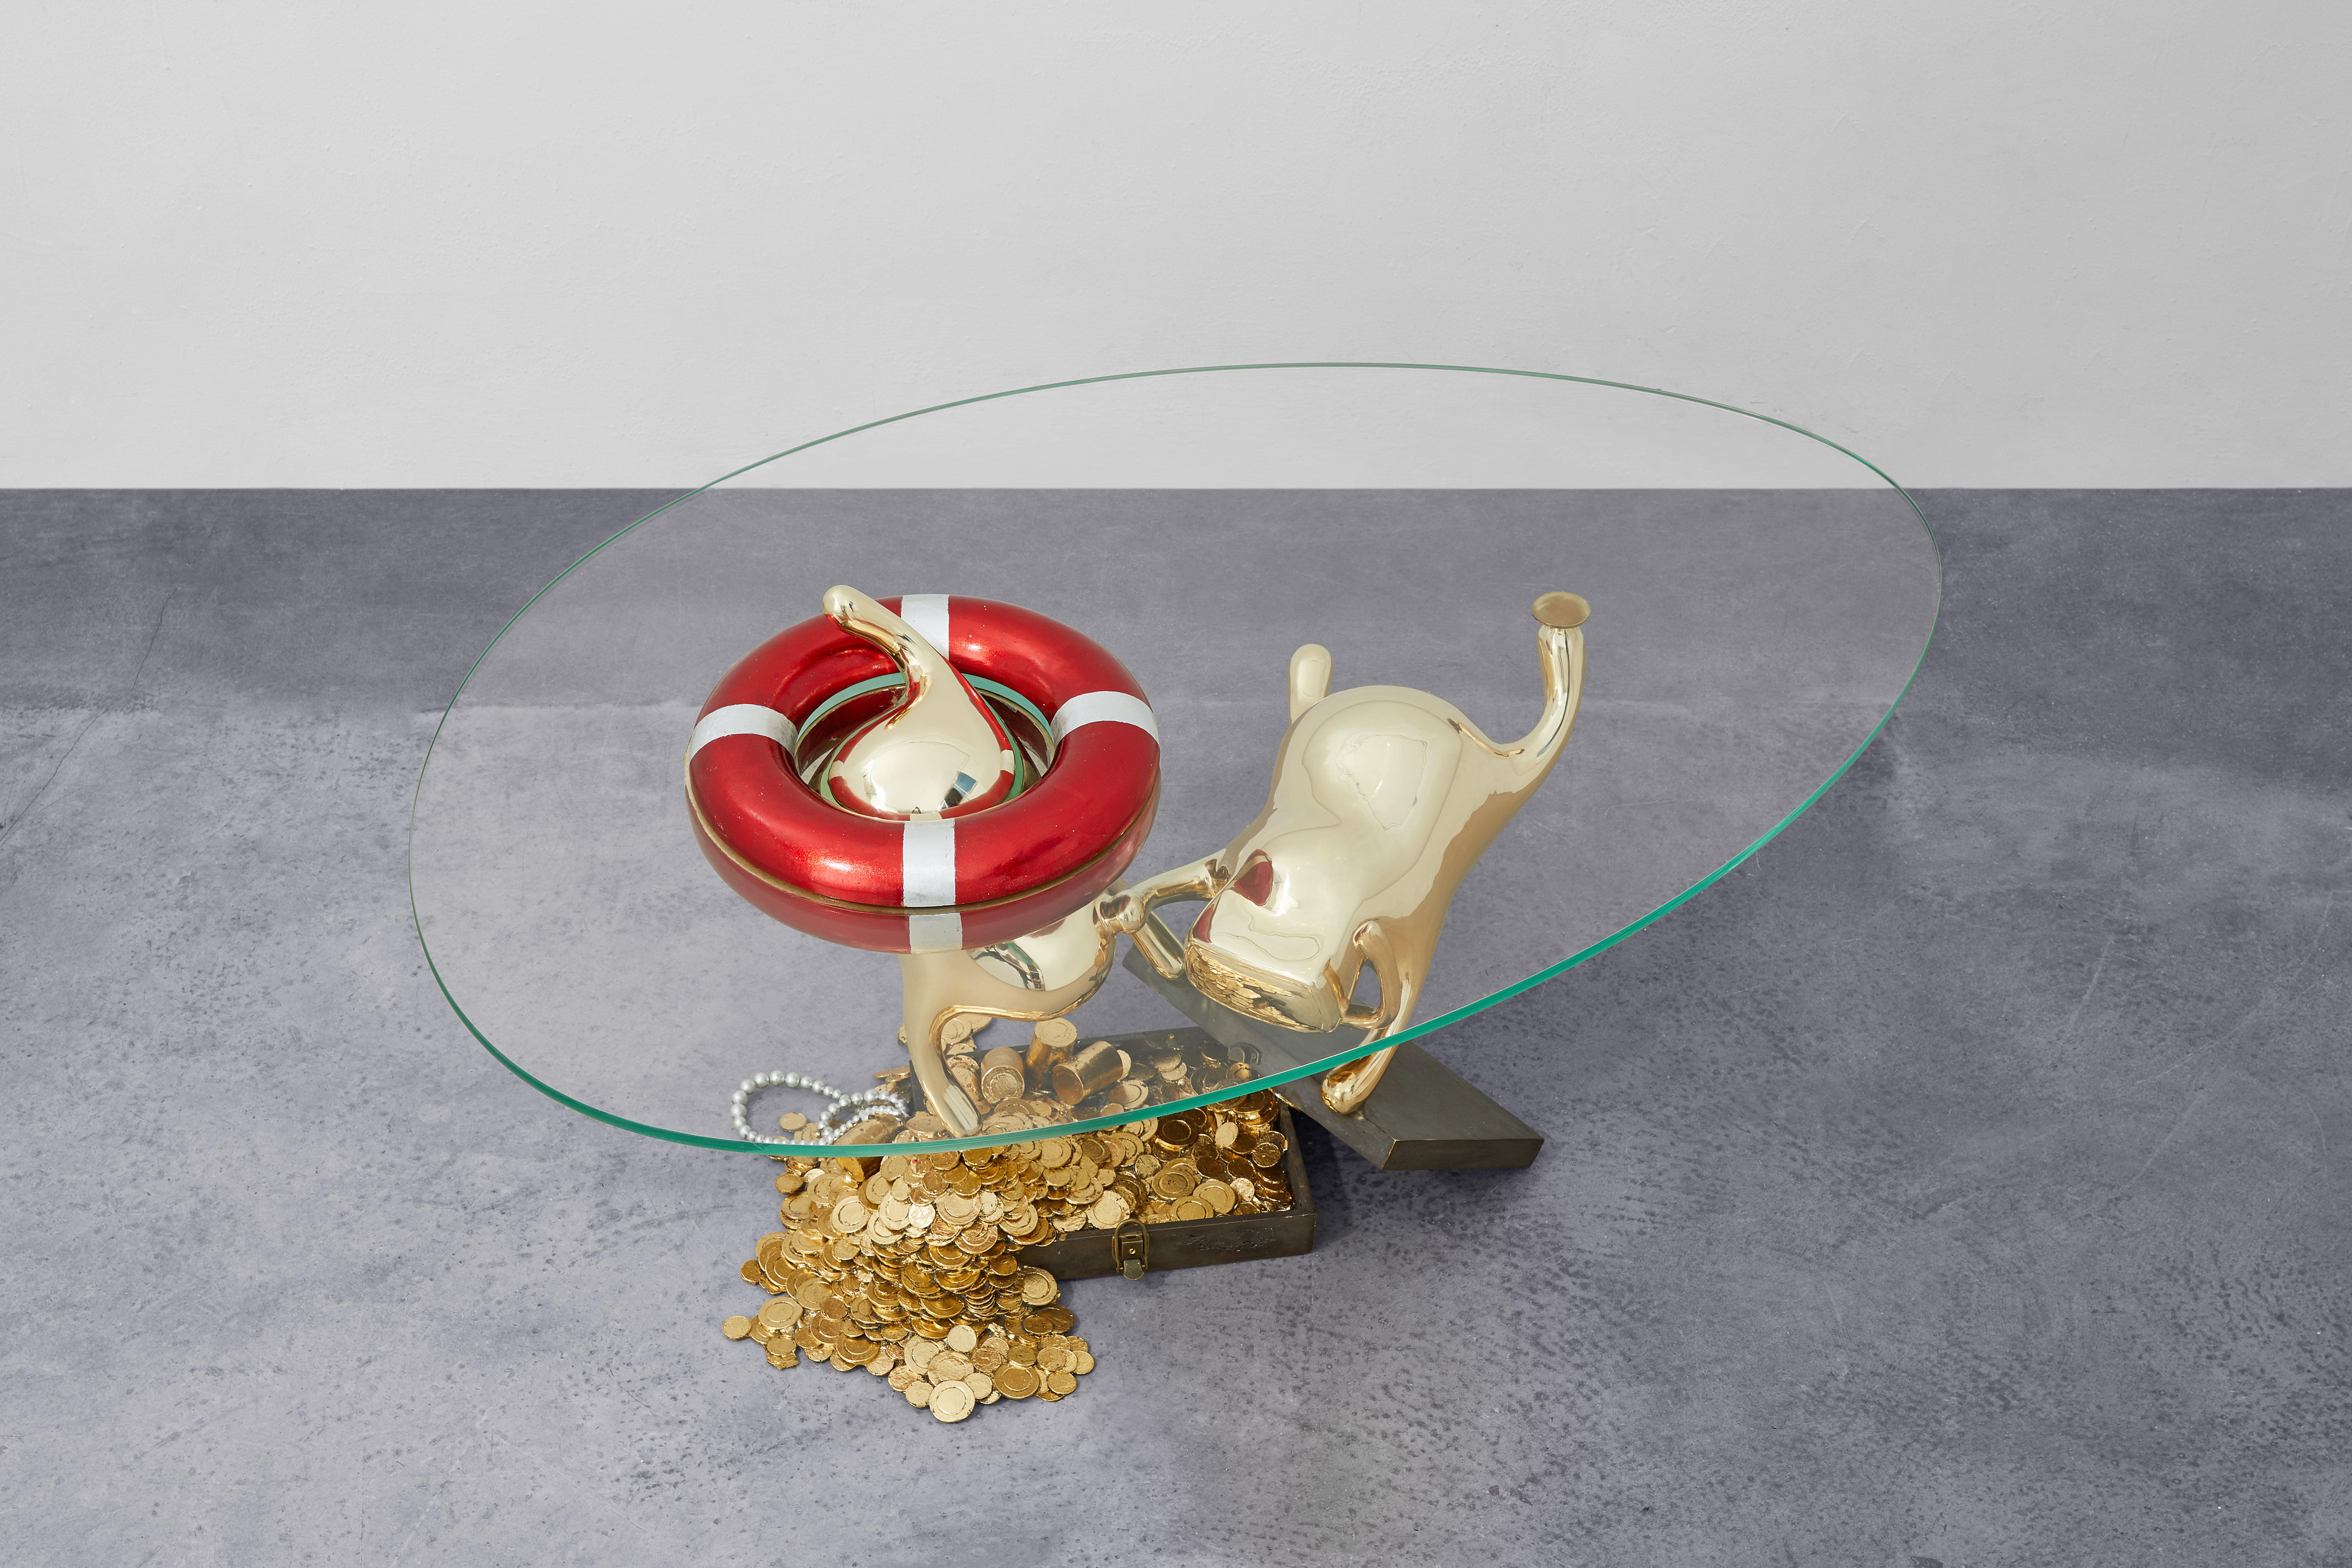 Zhipeng Tan’s ‘Treasures' coffee table embodies and further extends the concept of his most iconic collection, TanTan Collection. “This year, we have been forced to isolate yourself from one another to maintain safety. Although staying home has